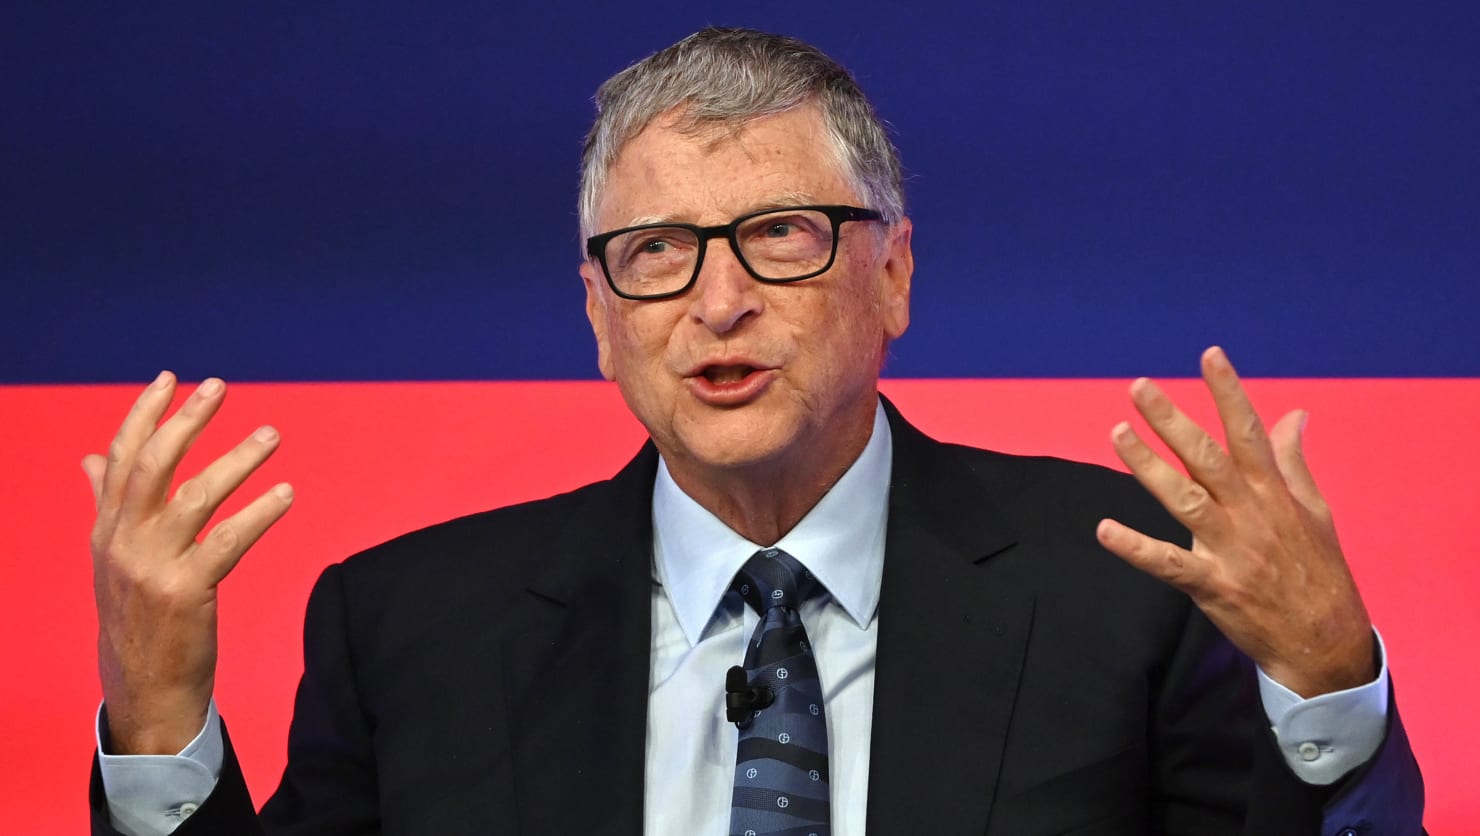 Bill Gates Bid to Get Venice Hotel Blocked Soon after Outcry